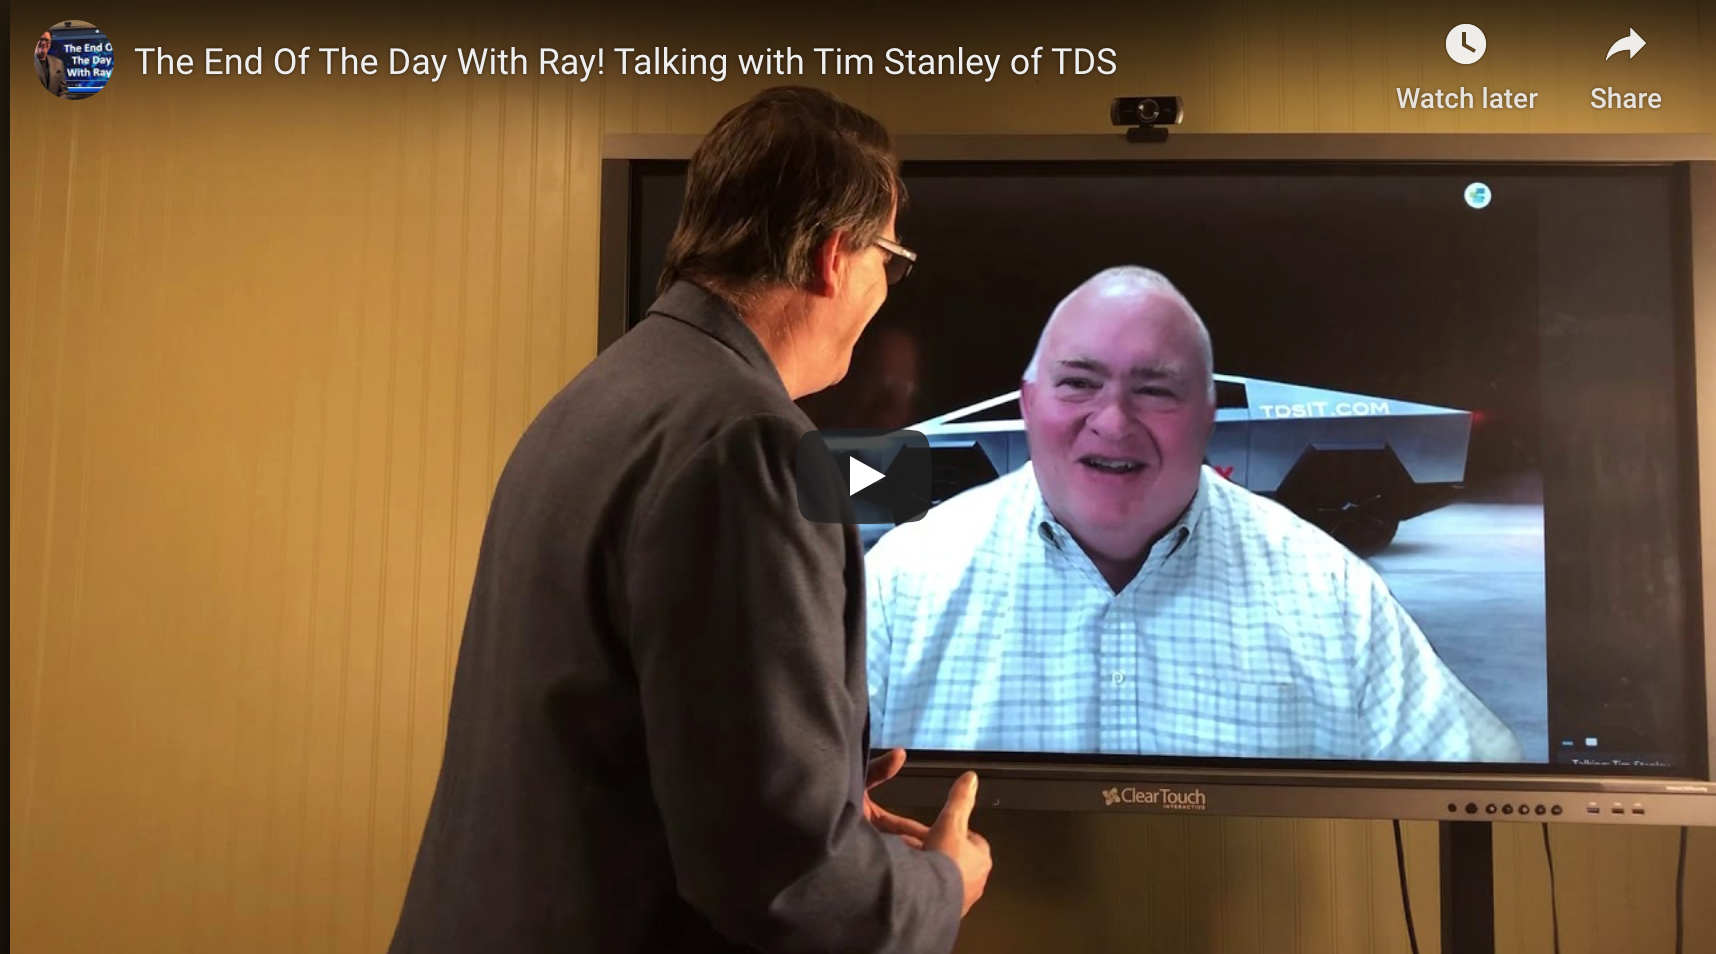 The End Of The Day With Ray! Talking with Tim Stanley of TDS